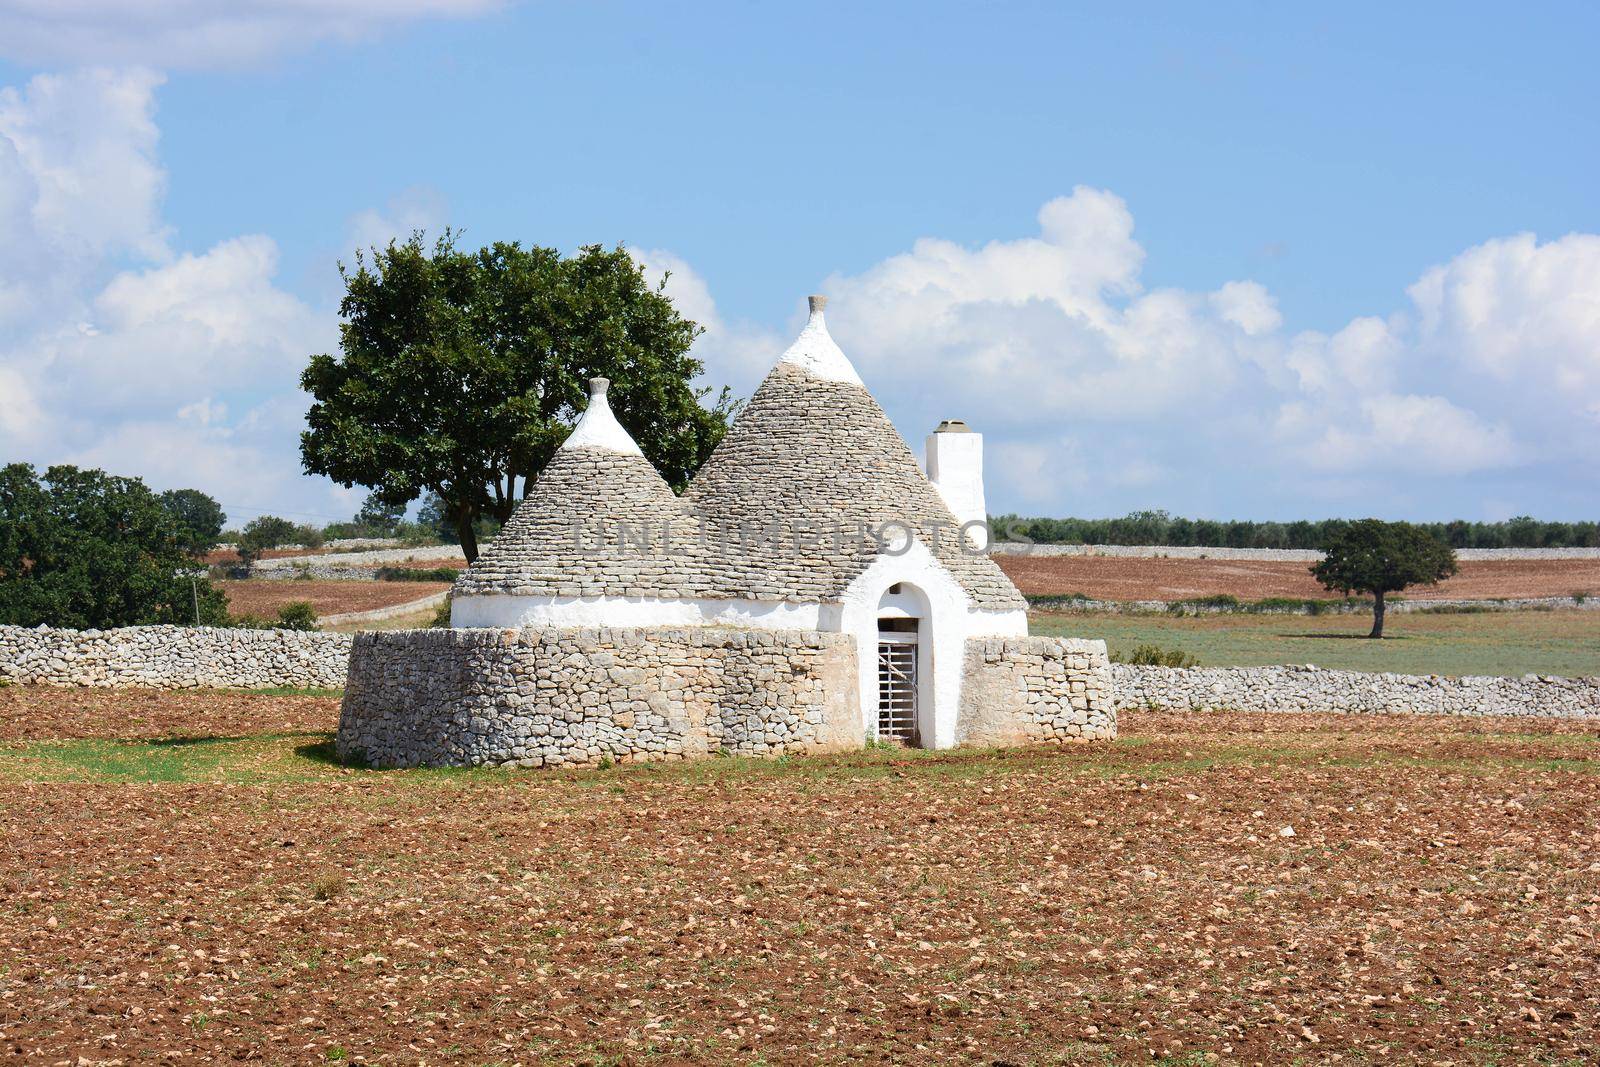 peasant architecture by iacobino